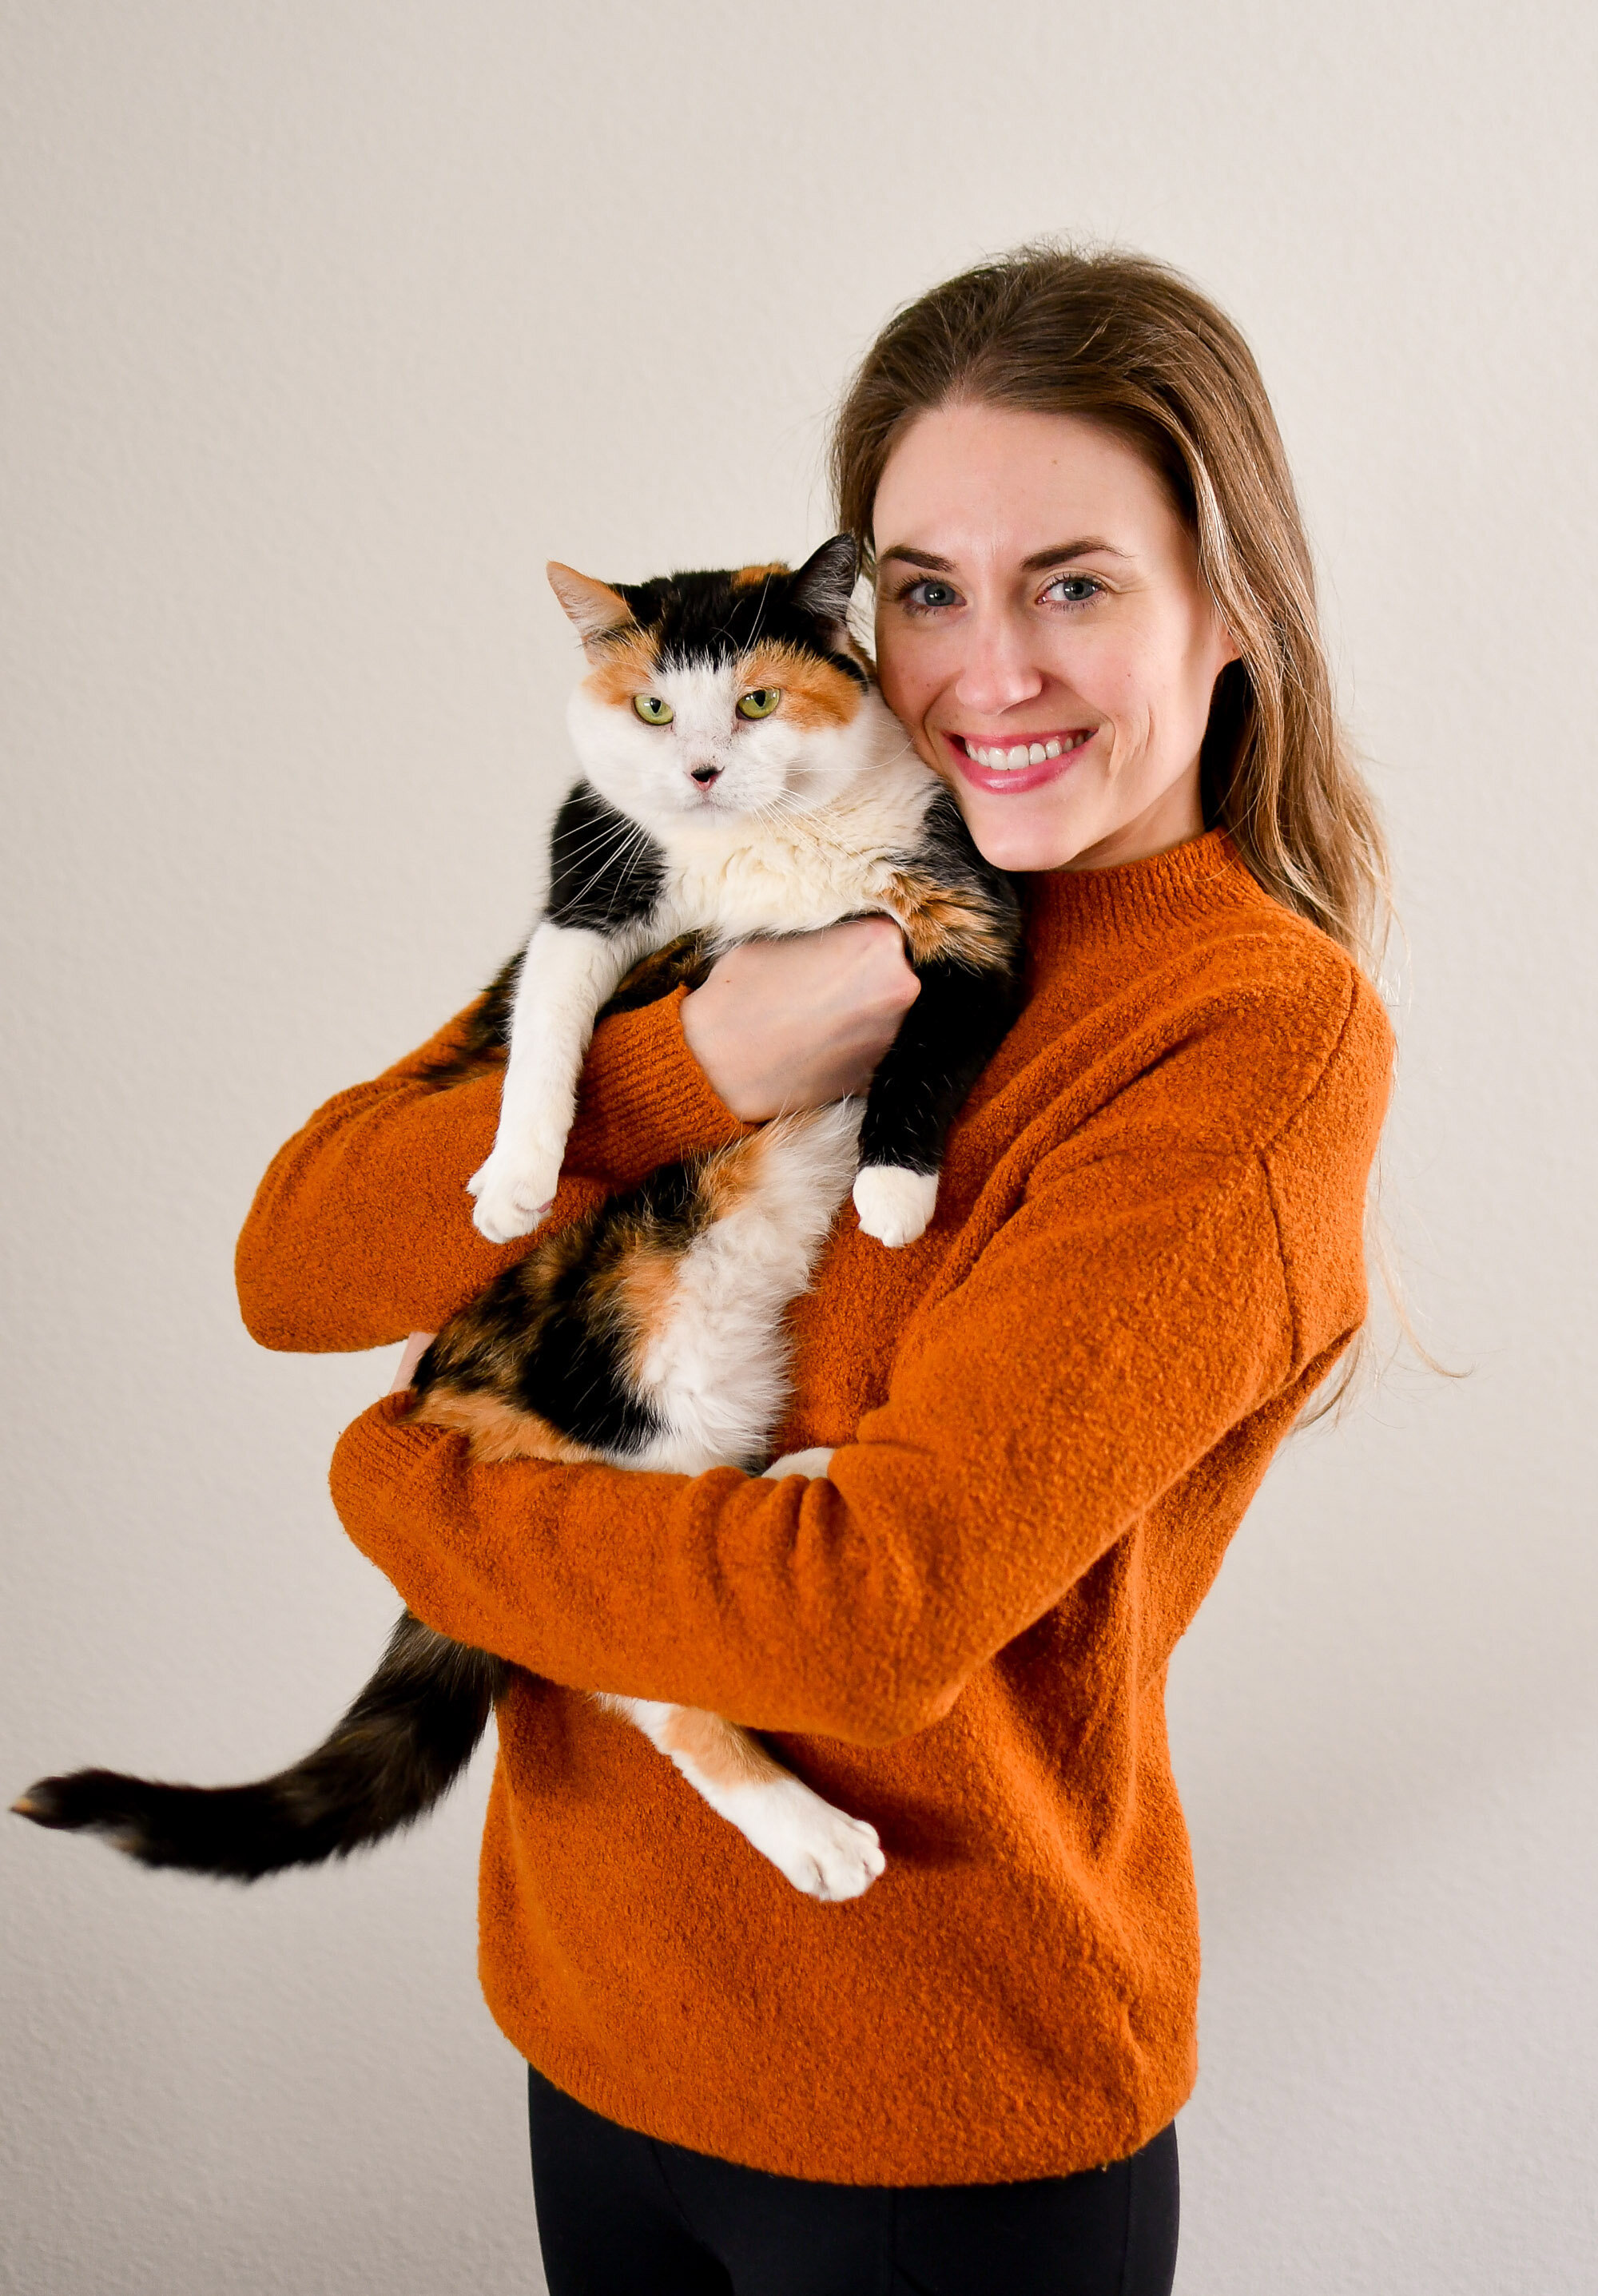 What to wear to match your calico cat — Cotton Cashmere Cat Hair